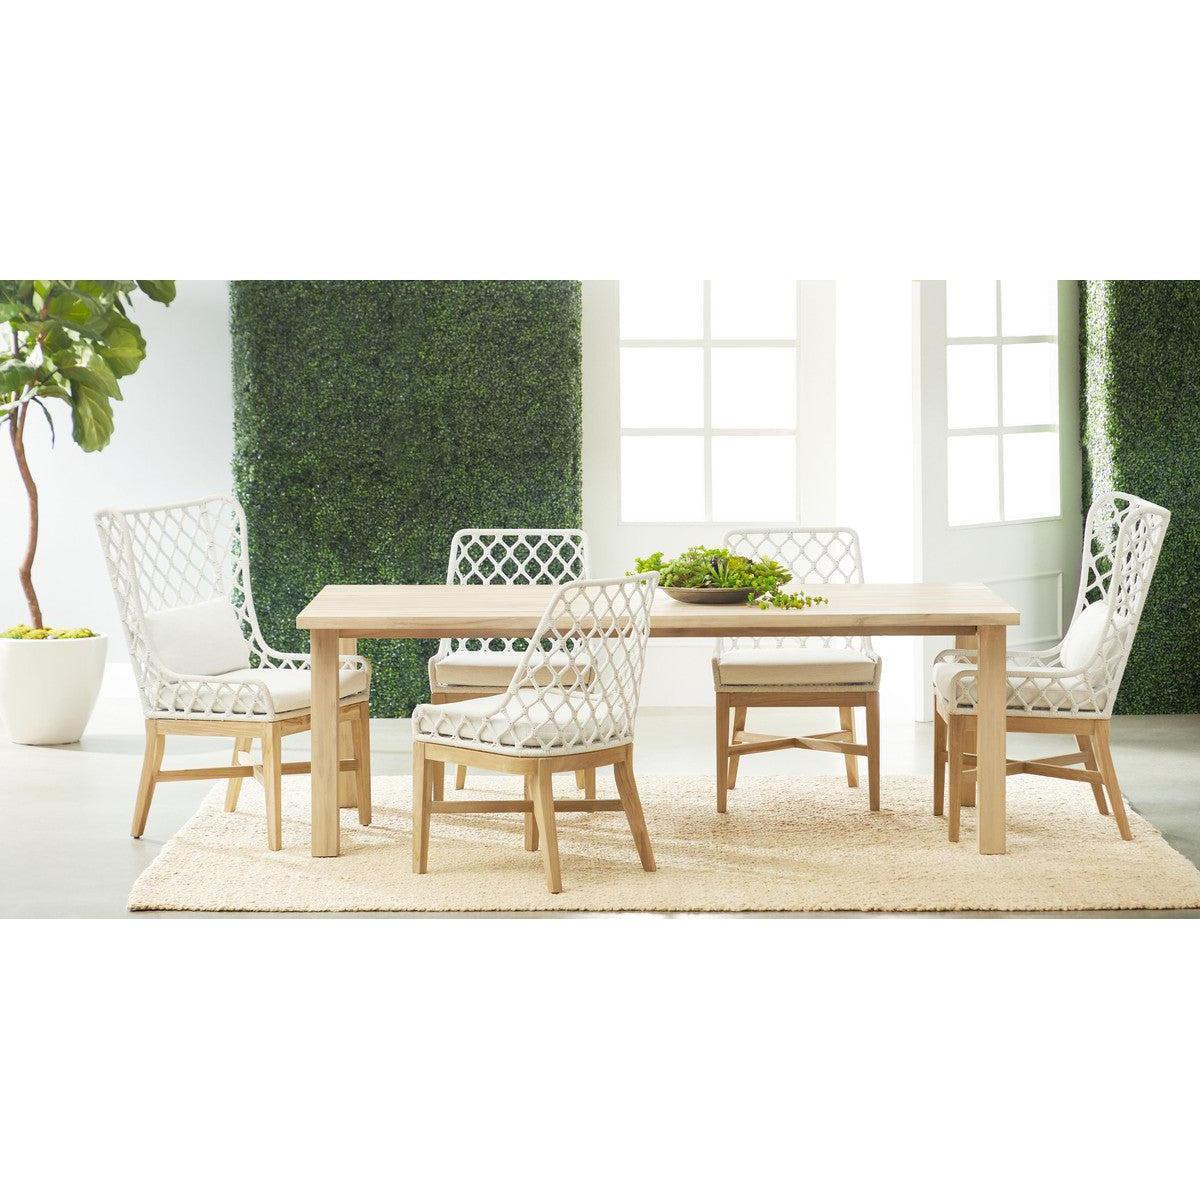 Lattis Outdoor Wing Chair White Speckle Rope & Seat Gray Teak Outdoor Accent Chairs Sideboards and Things By Essentials For Living